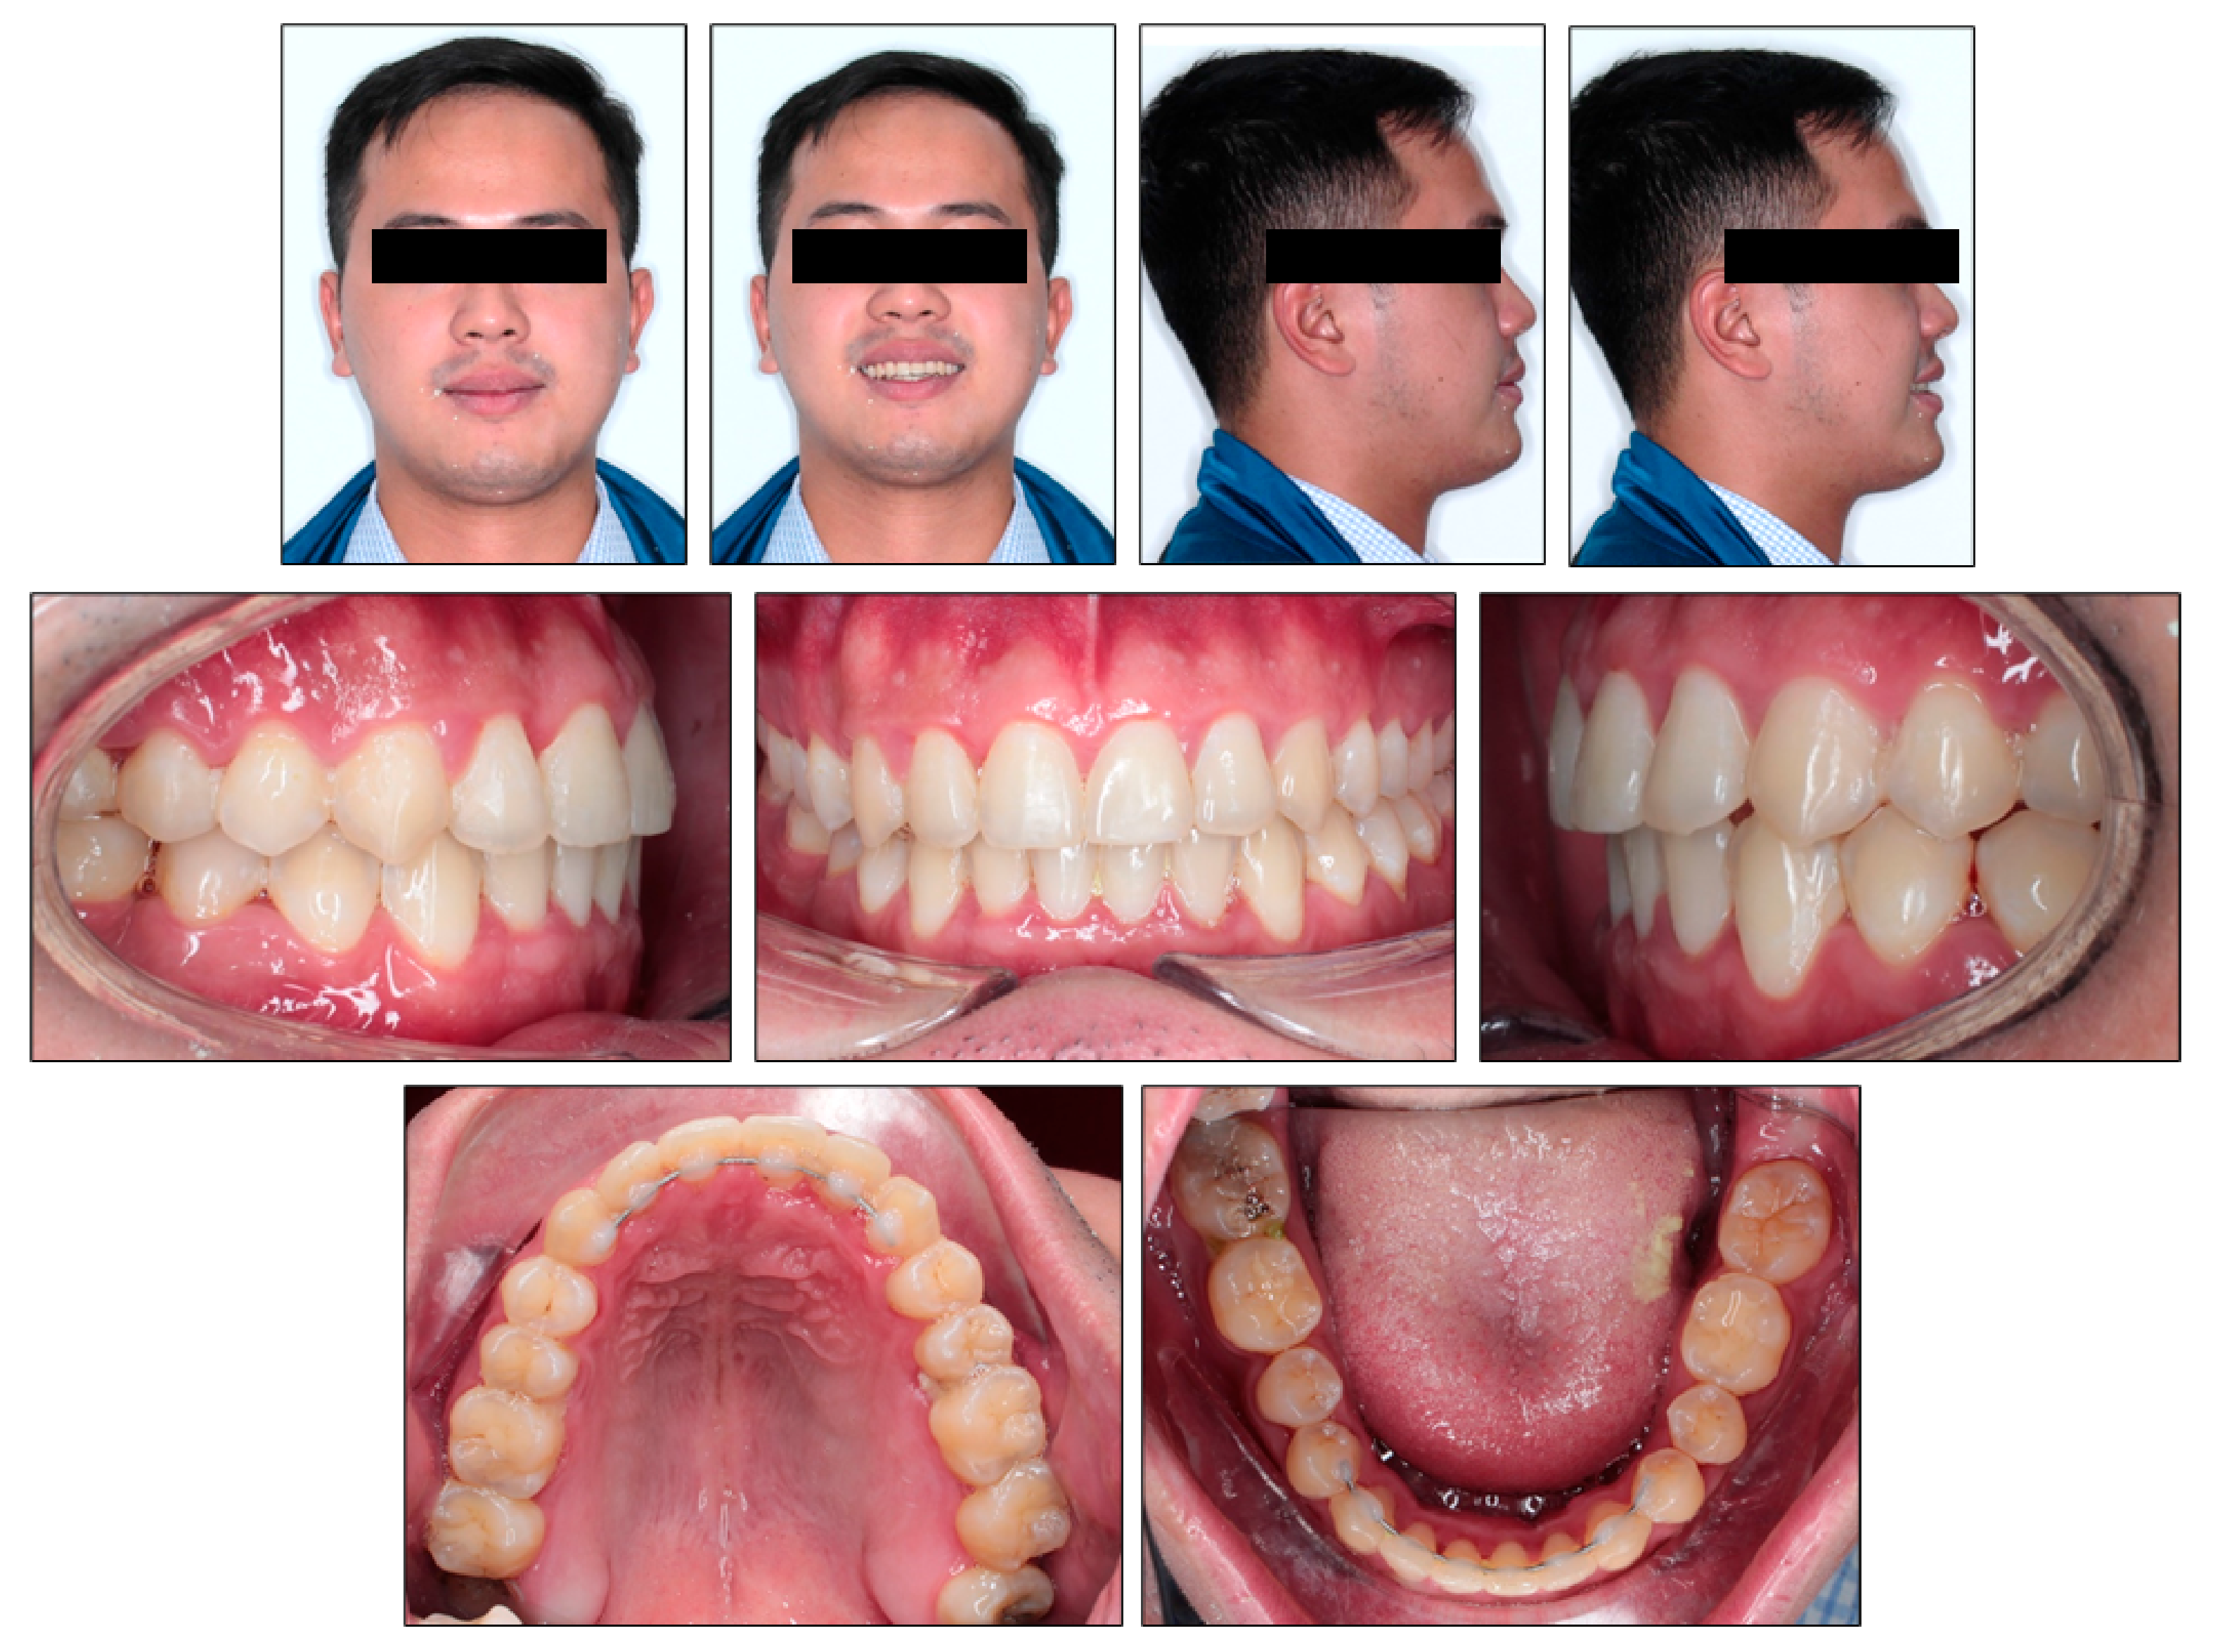 Orthodontics: Maloccclusion, other problems, and starting treatment